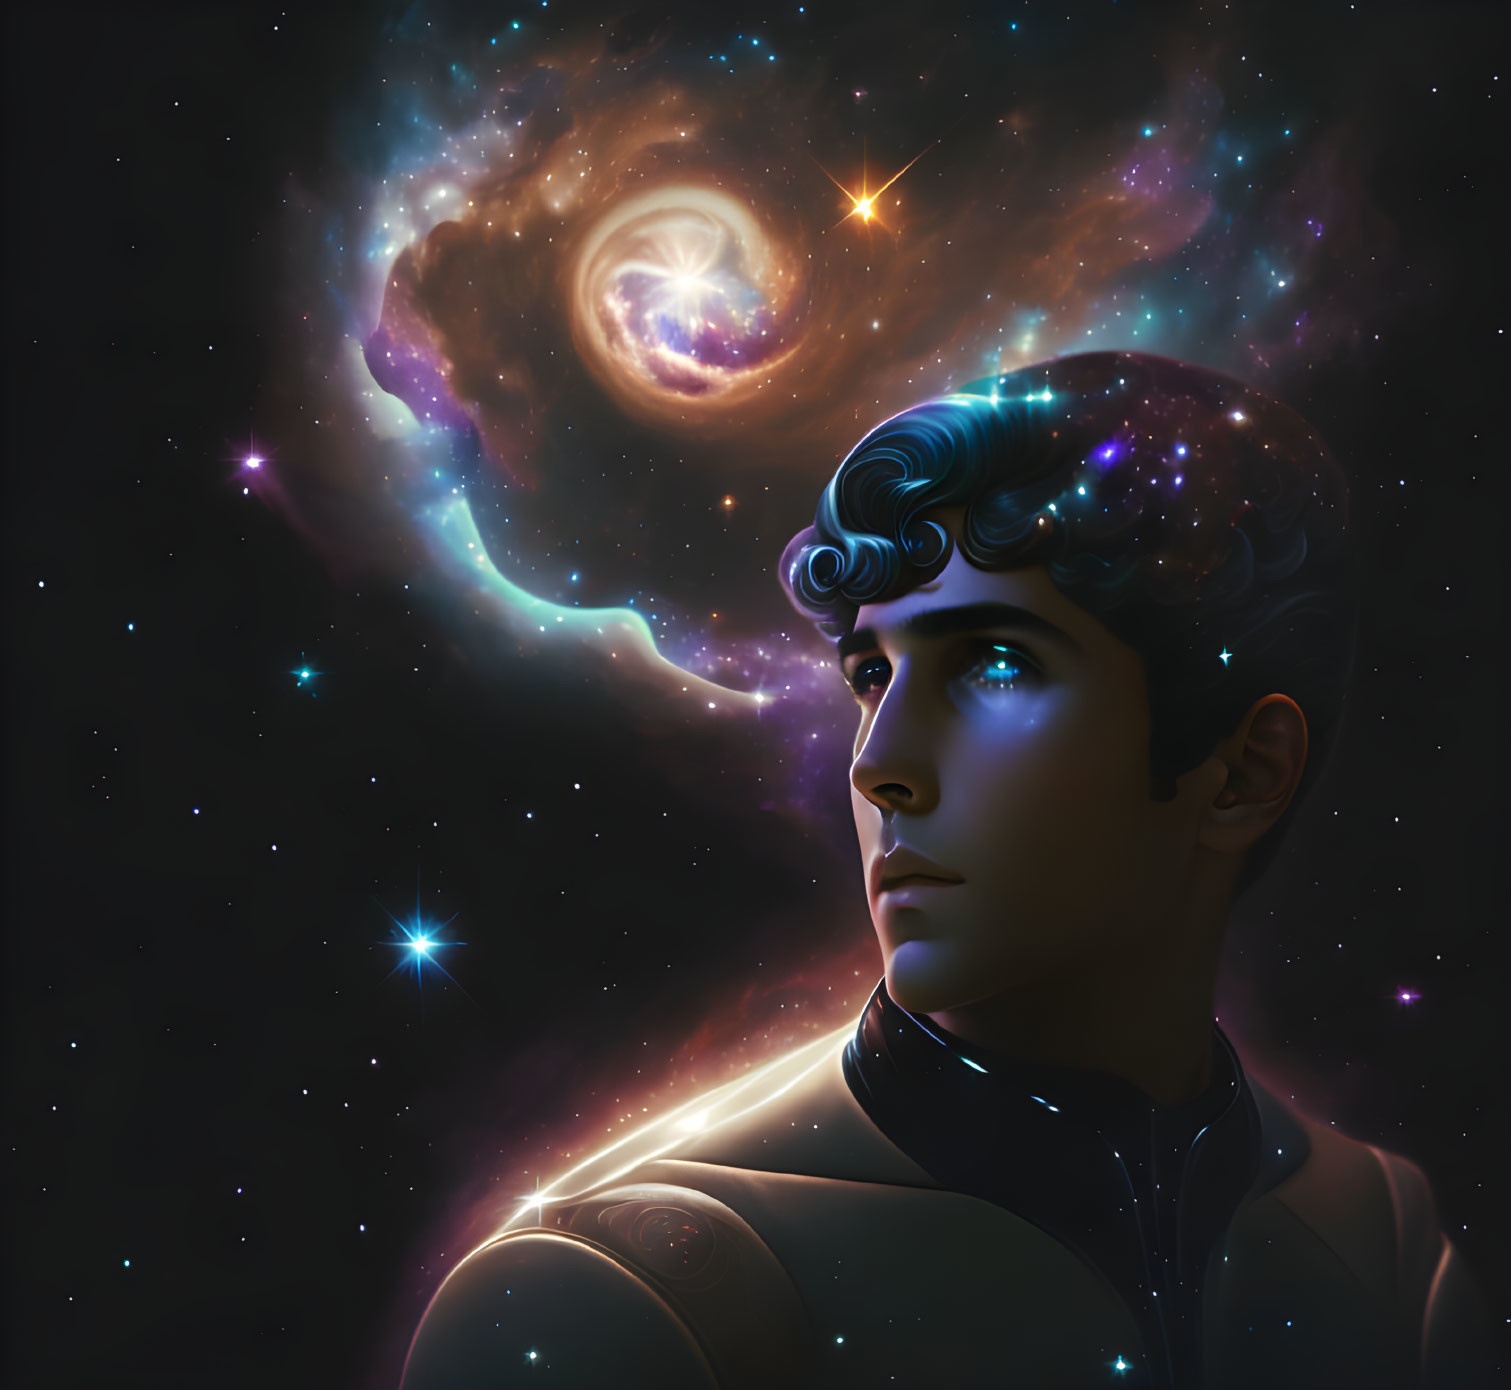 Man's Profile with Space and Galaxies: Cosmic Digital Illustration